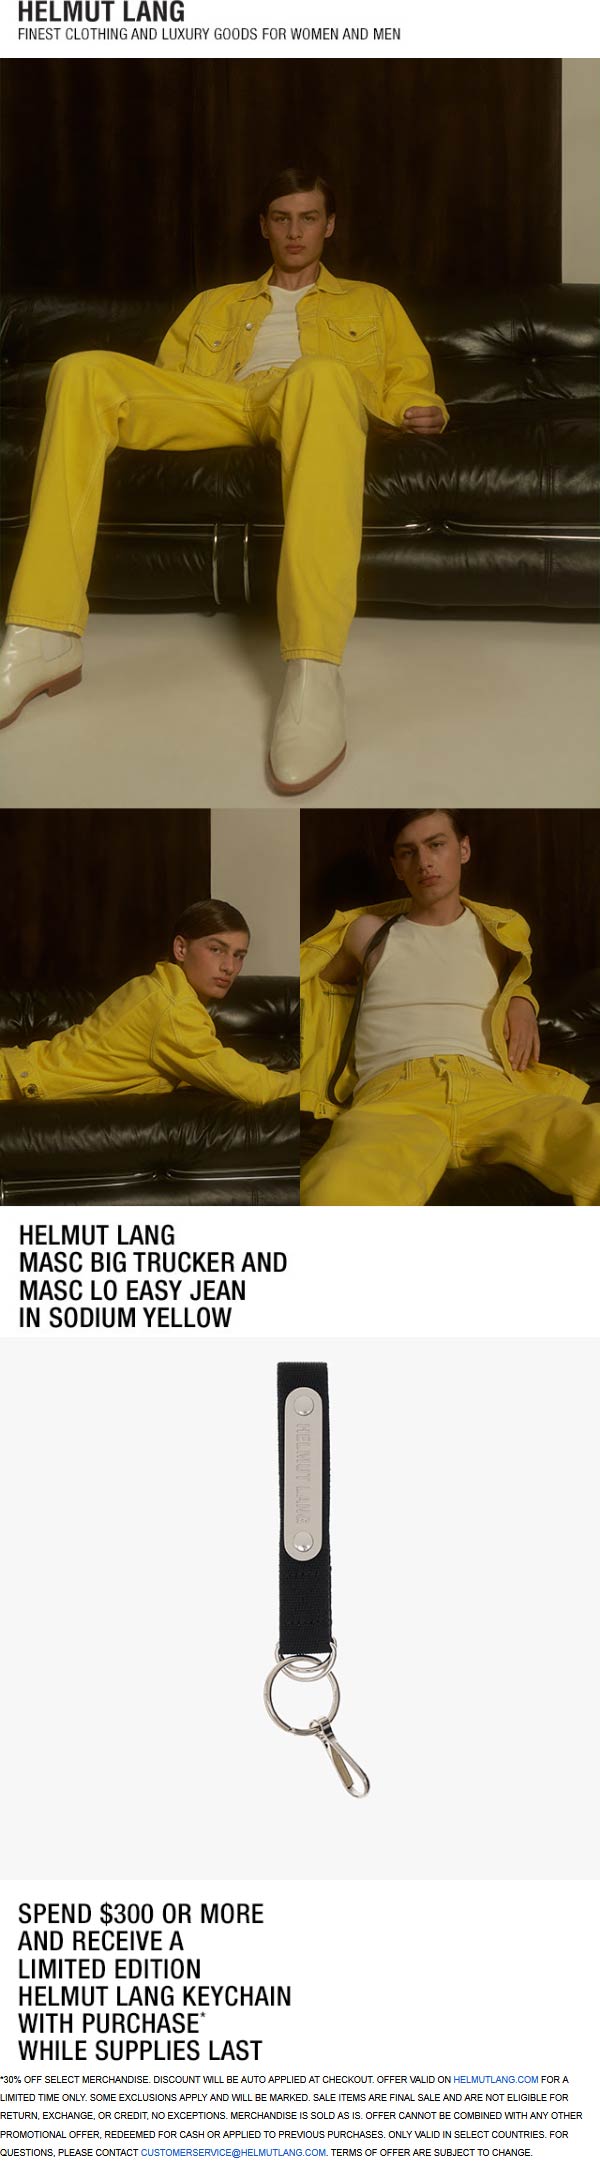 Helmut Lang stores Coupon  Extra 30% off everything at Helmut Lang + free keychain over $300 #helmutlang helmutlang fashion ootd streetstyle balenciaga style vintage grailed streetwear gucci helmutlangarchive 